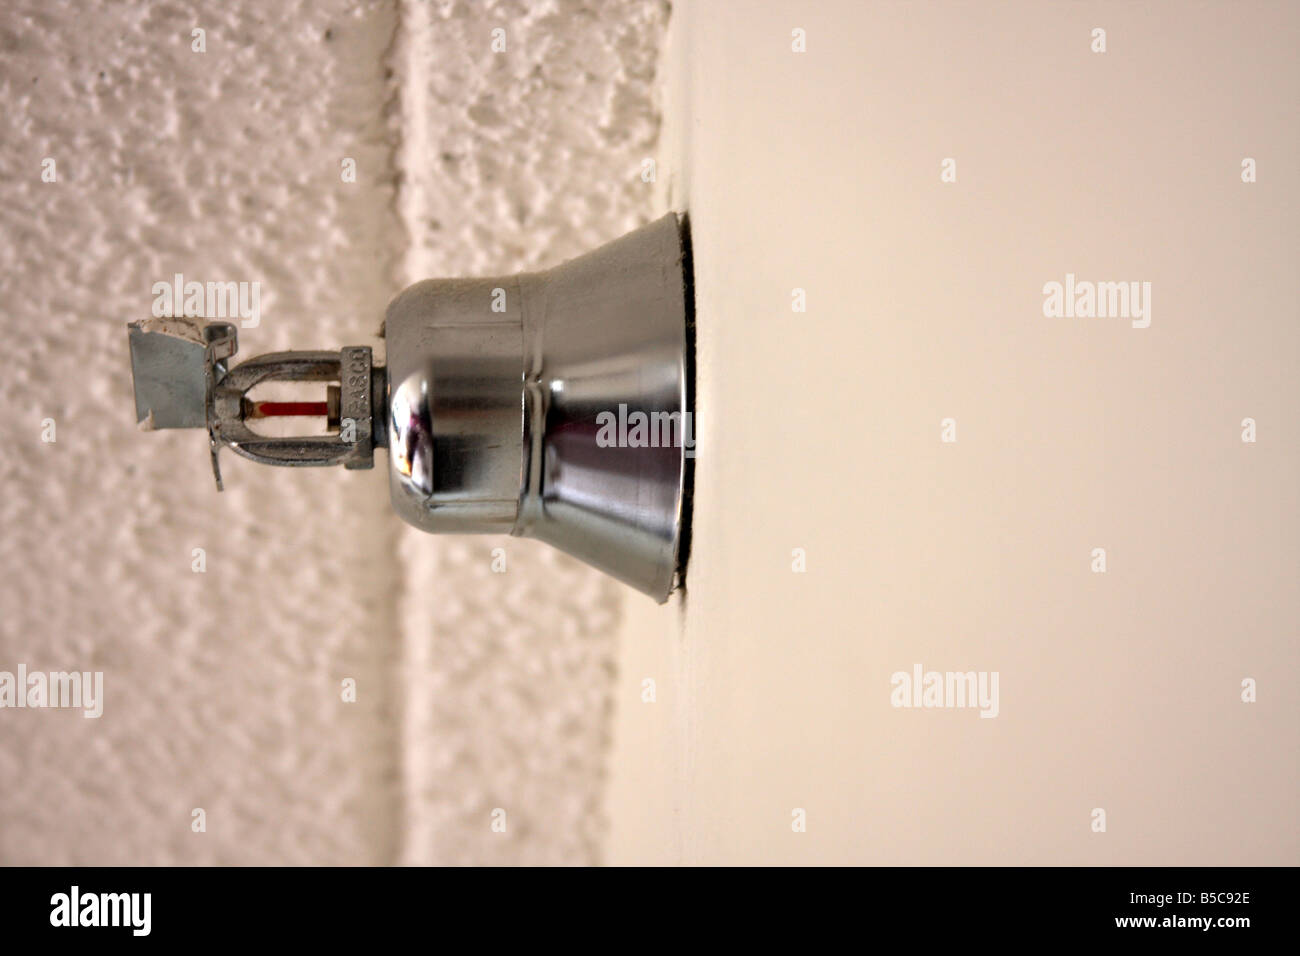 A hotel wall sprinkler in the Midwest looking at the ceiling Stock Photo